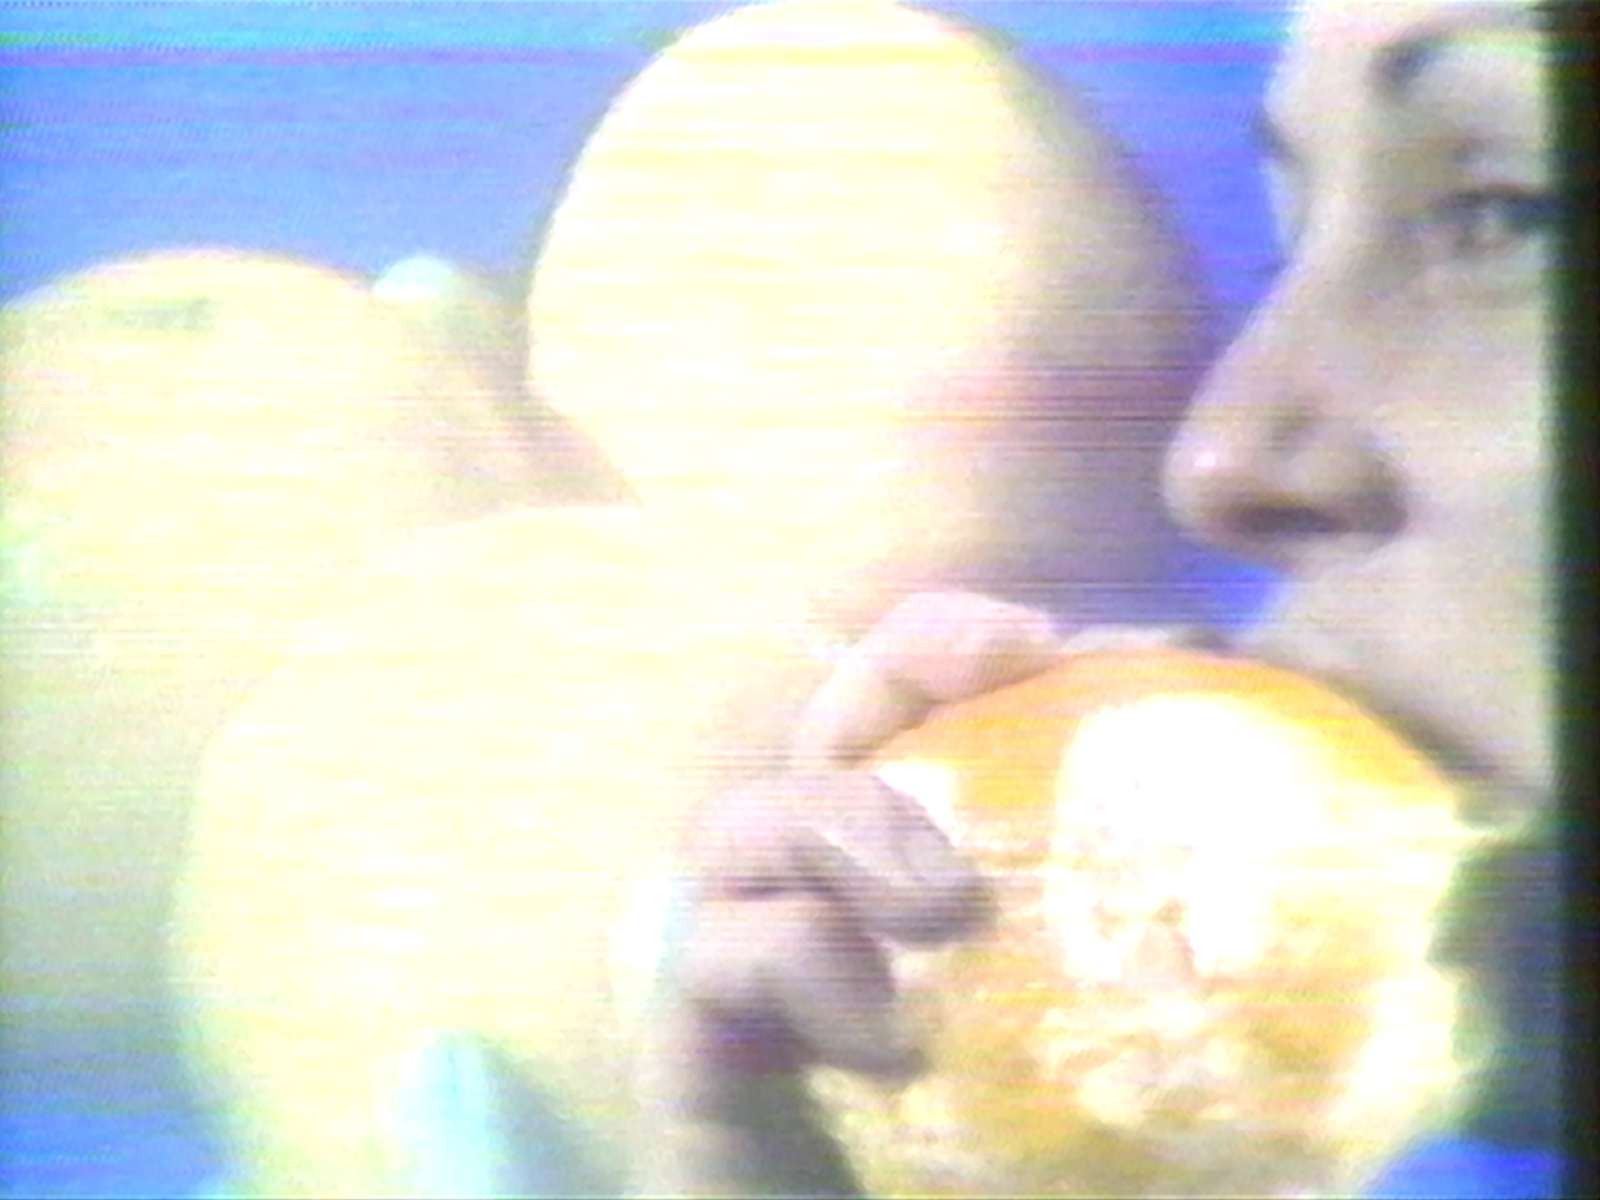 Lynda Benglis, 'Collage', 1973 (still) video with colour and sound, 9 minutes 30 seconds © Lynda Benglis. Courtesy of Video Data Bank, School of the Art Institute of Chicago.